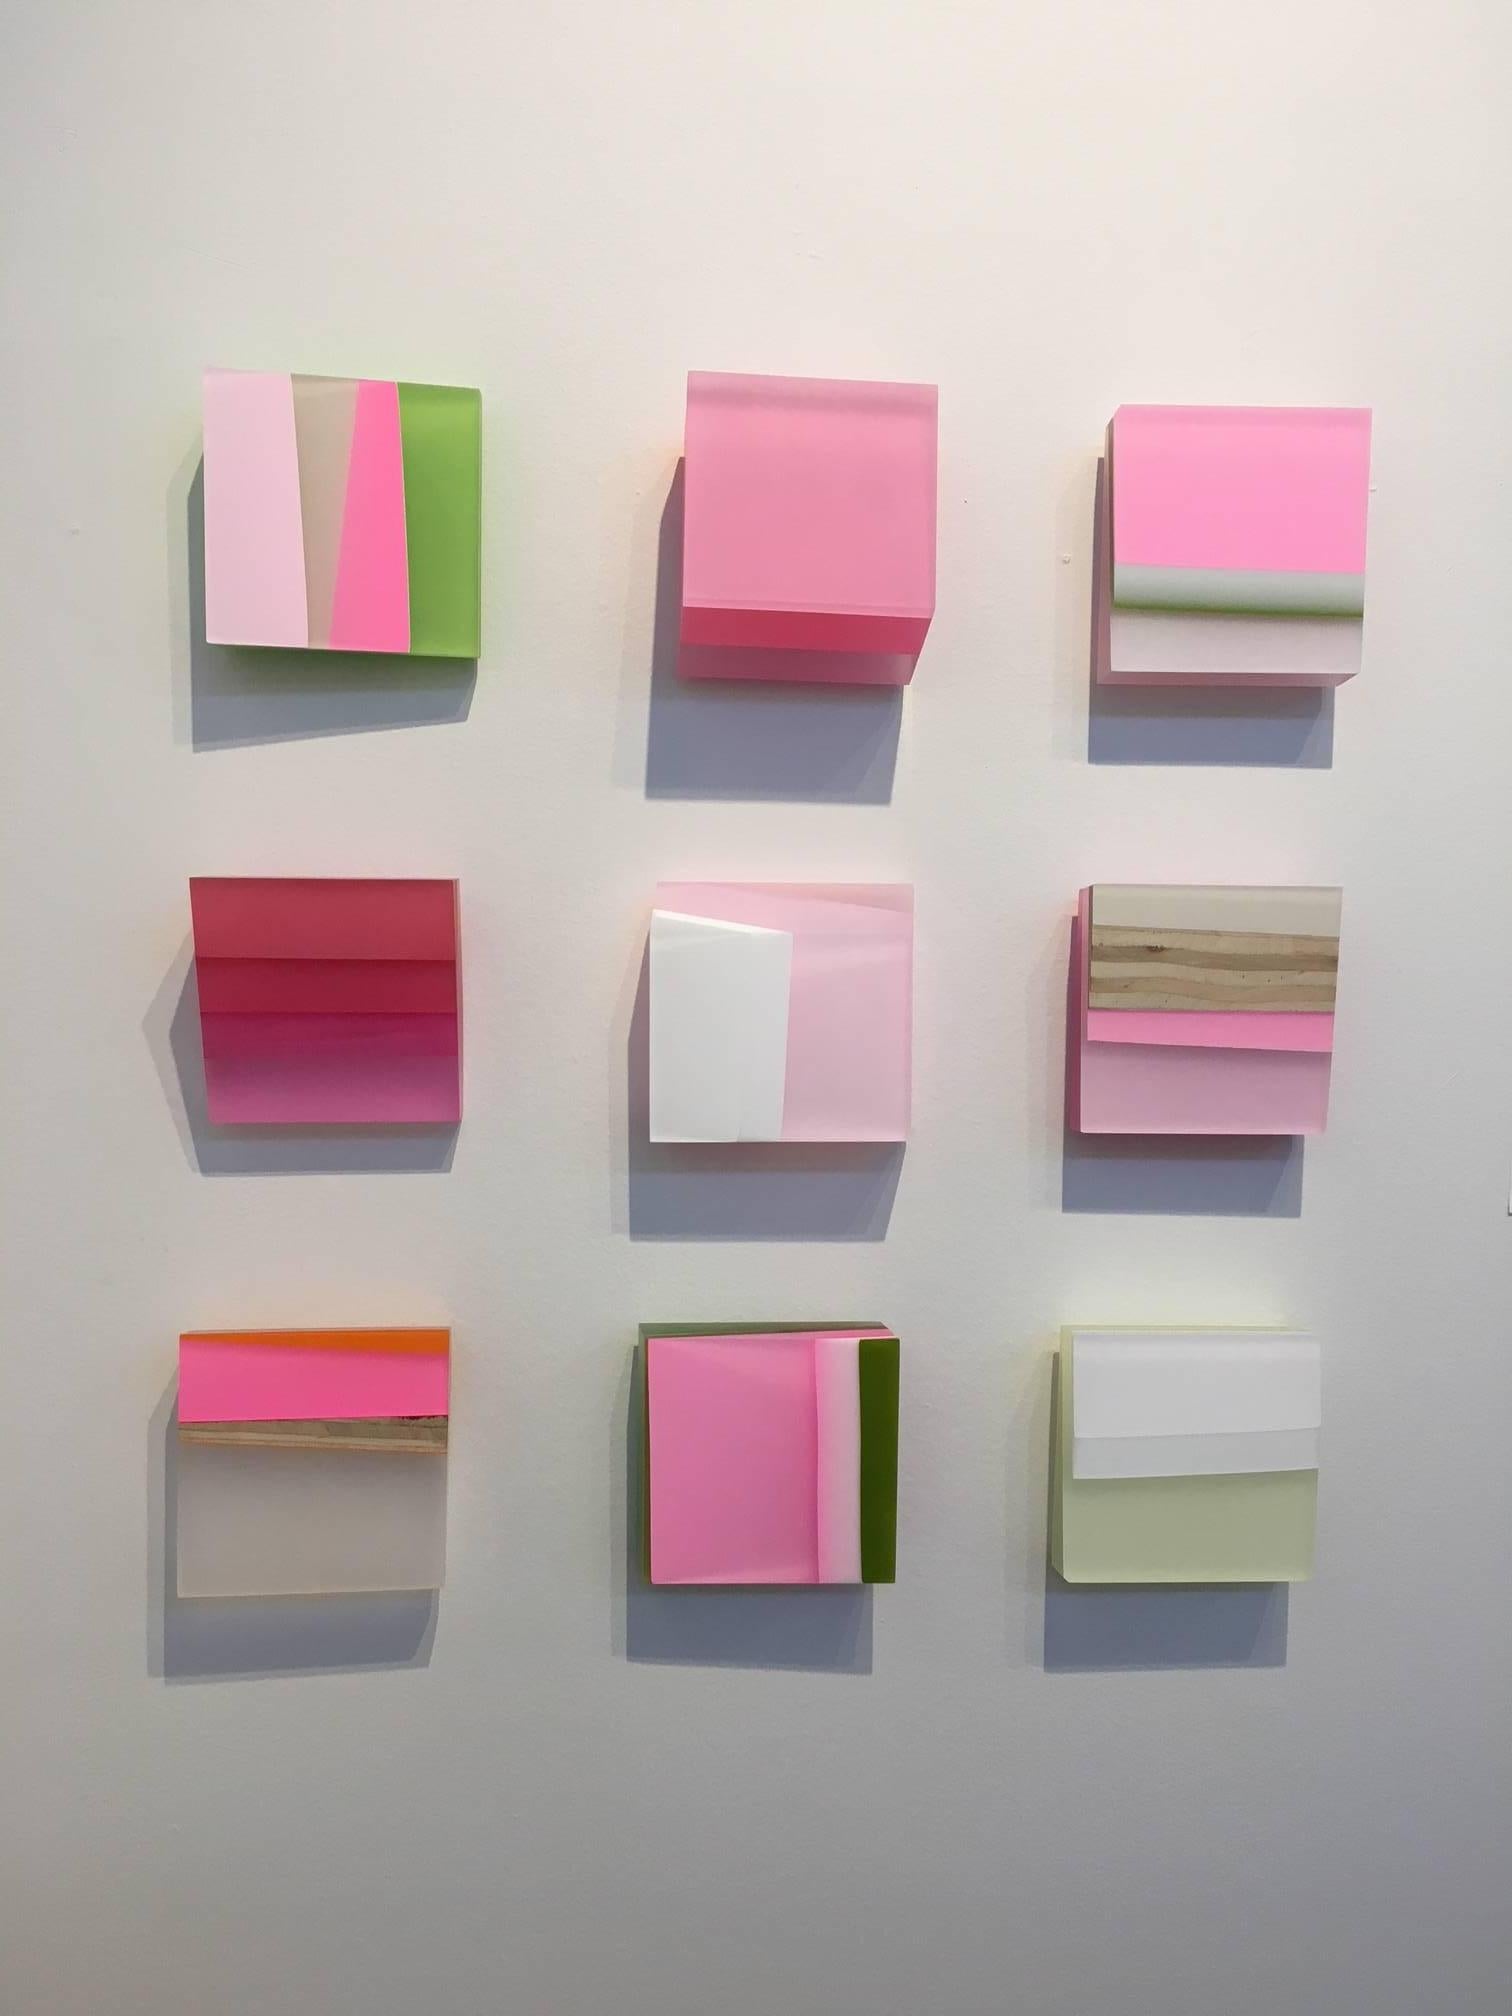 6.6 x 6.5 inches
lucite, acrylic paint
2018

Michelle Benoit works in an additive way where she starts with a flat surface of wood and layers transparencies atop it to create depth for her abstract mural sculptures.  Often her materials are recycled